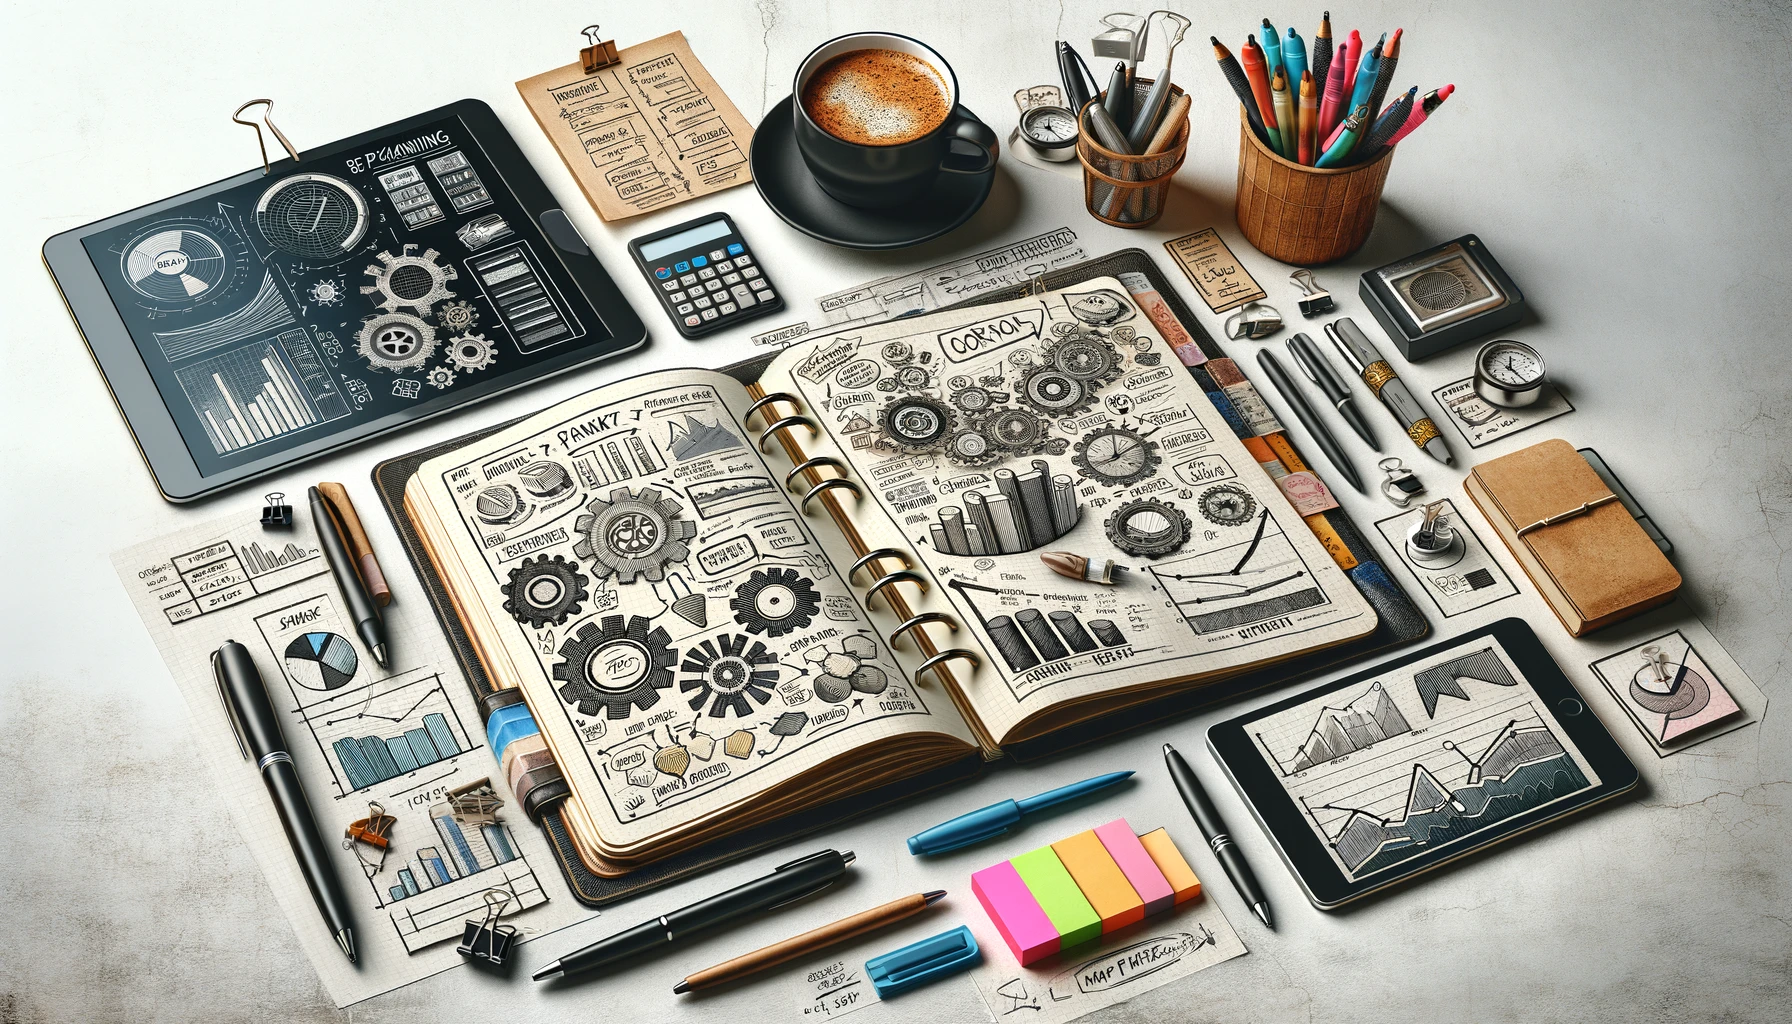 The image showcases a detailed and engaging representation of business planning, featuring a notebook with strategic notes and a digital tablet with market analysis on a desk, symbolizing dedication and strategic thinking in a professional setting.